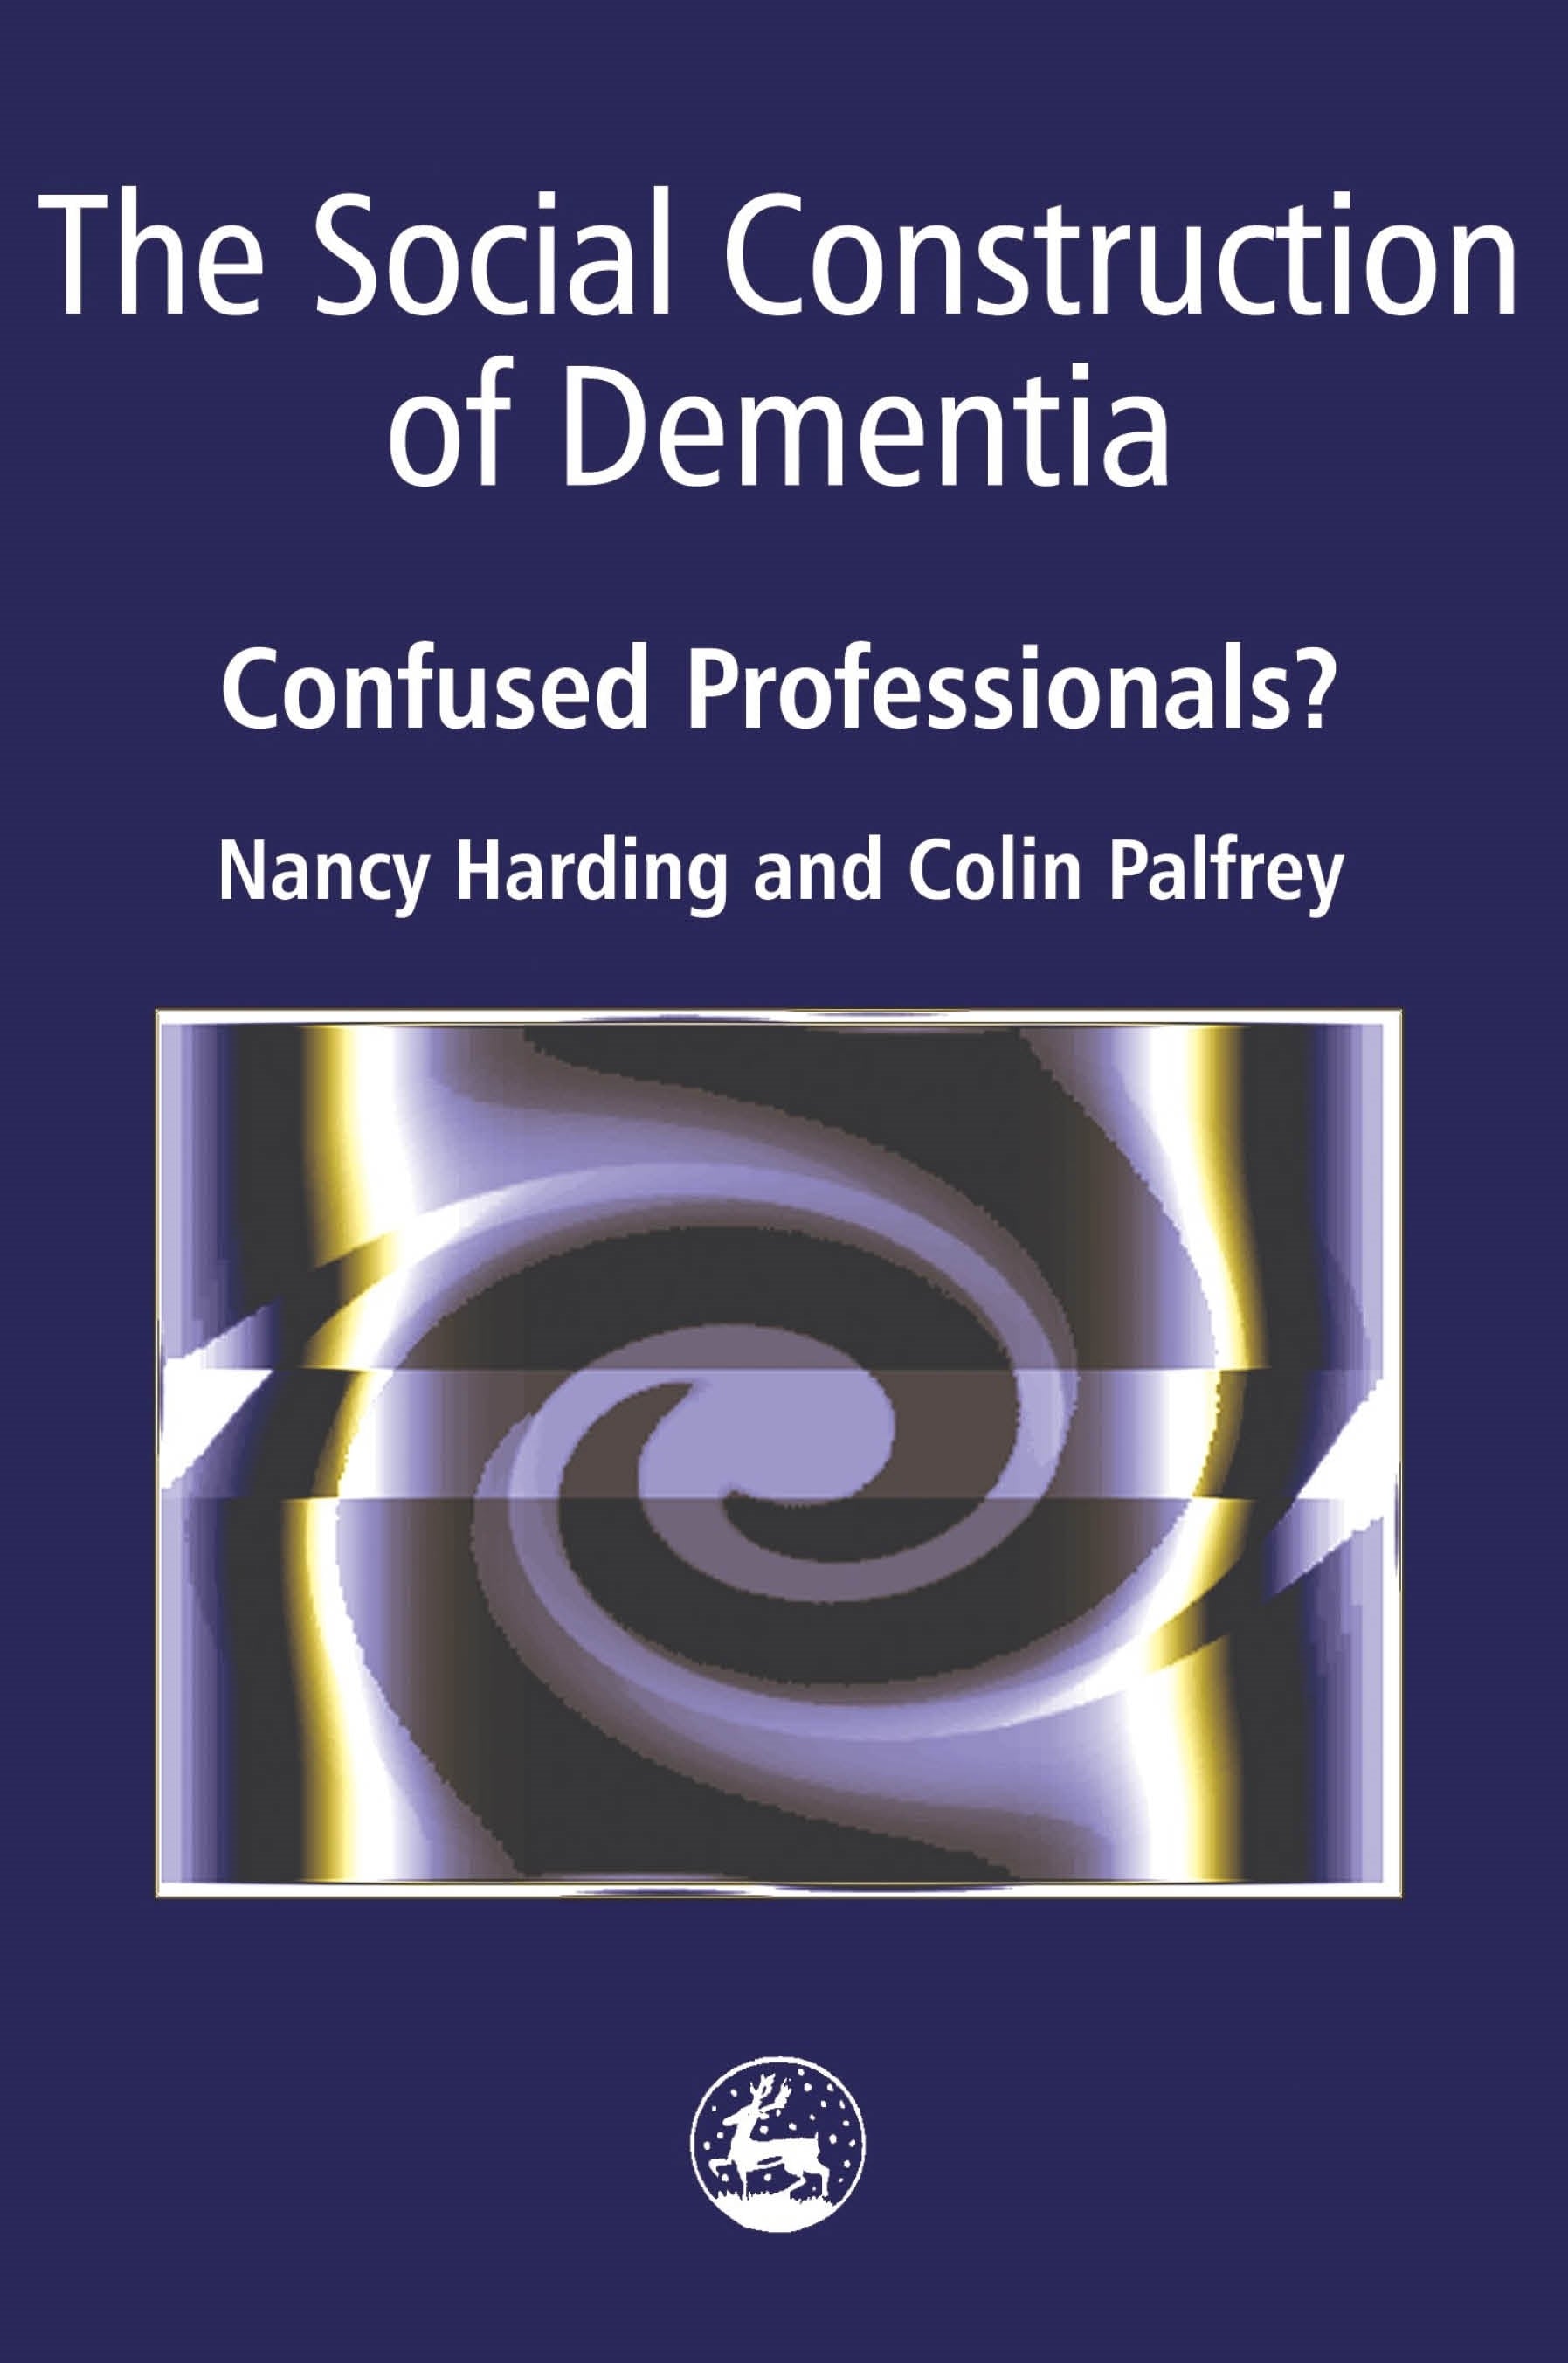 The Social Construction of Dementia by Colin Palfrey, Nancy Harding